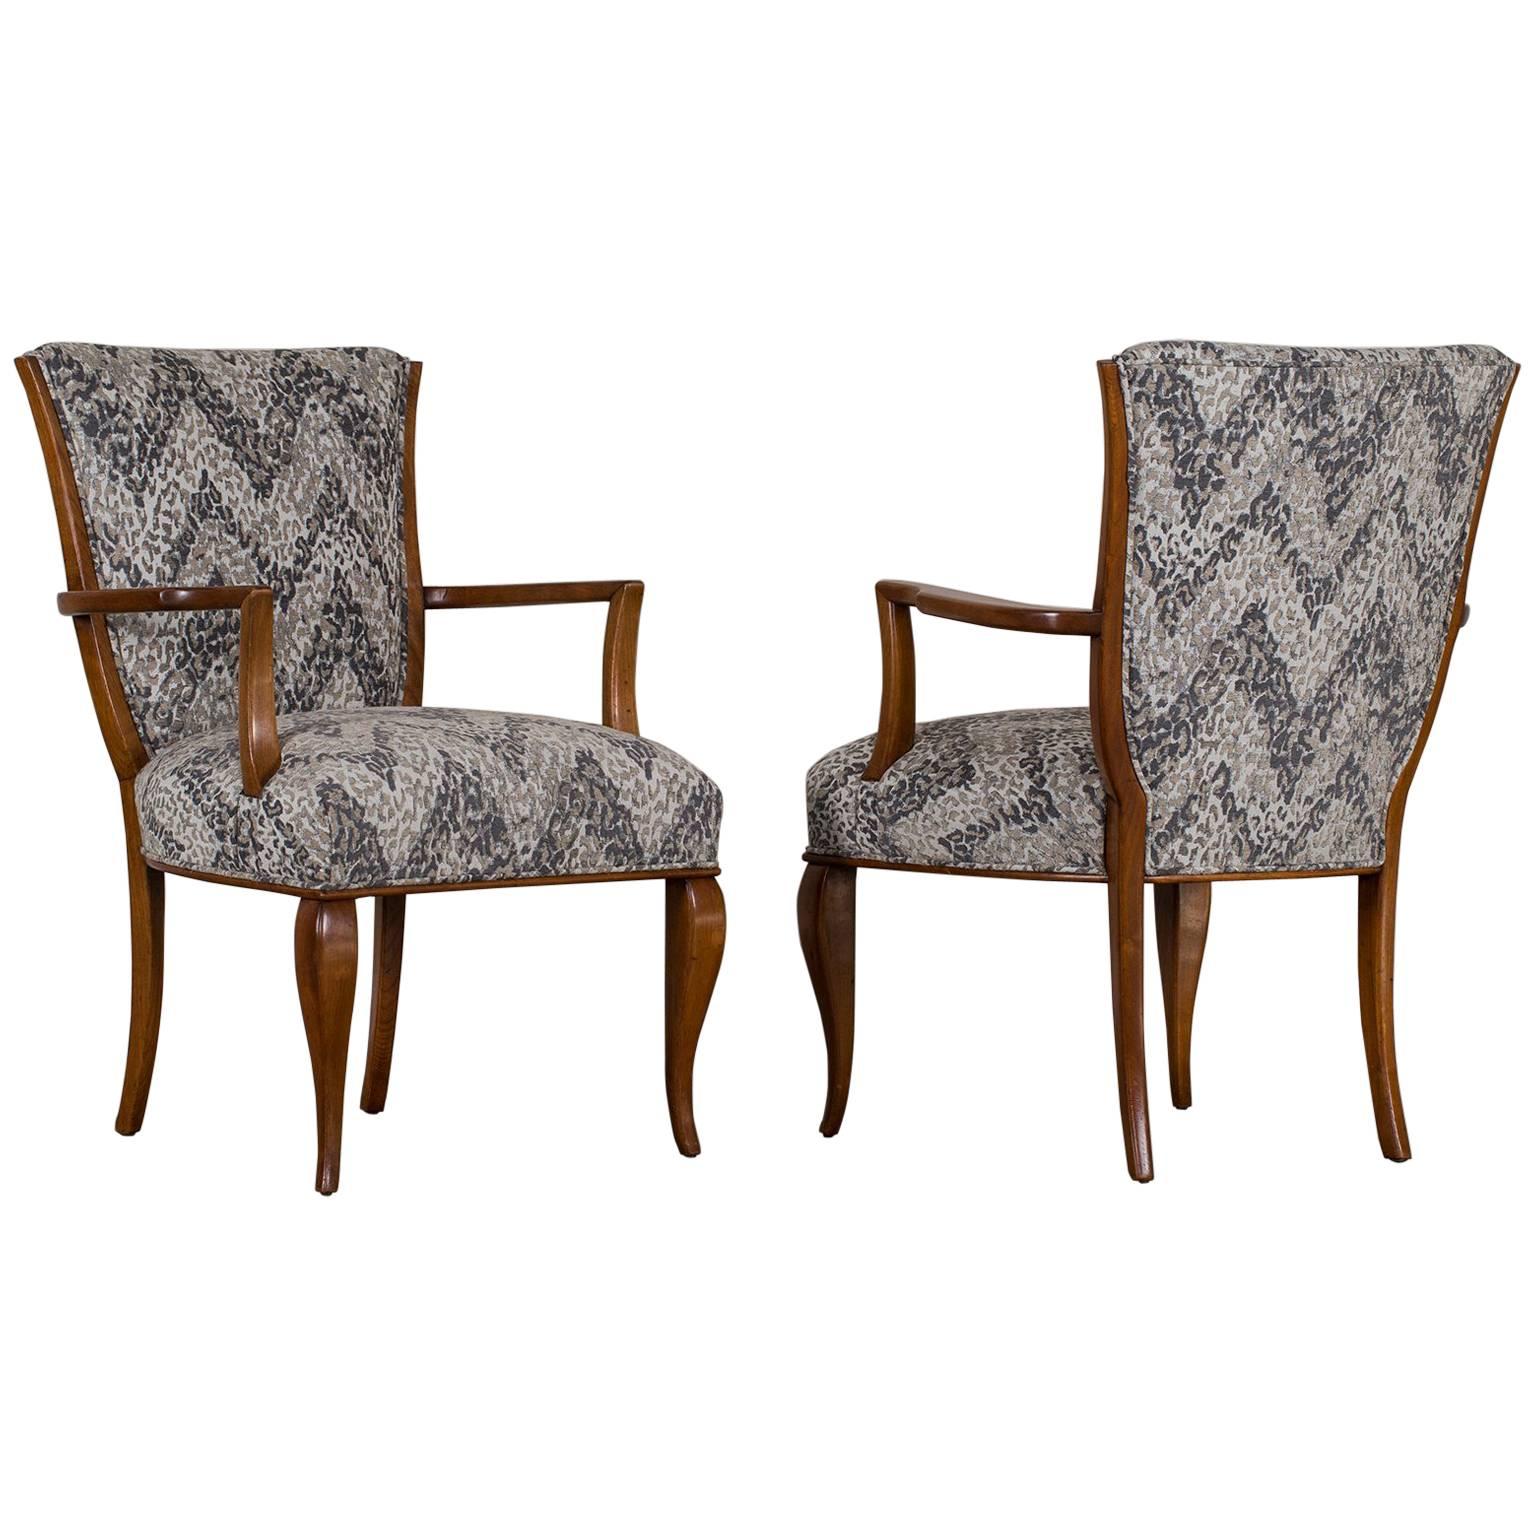 Pair of Vintage French Art Deco Beechwood Chairs, circa 1940